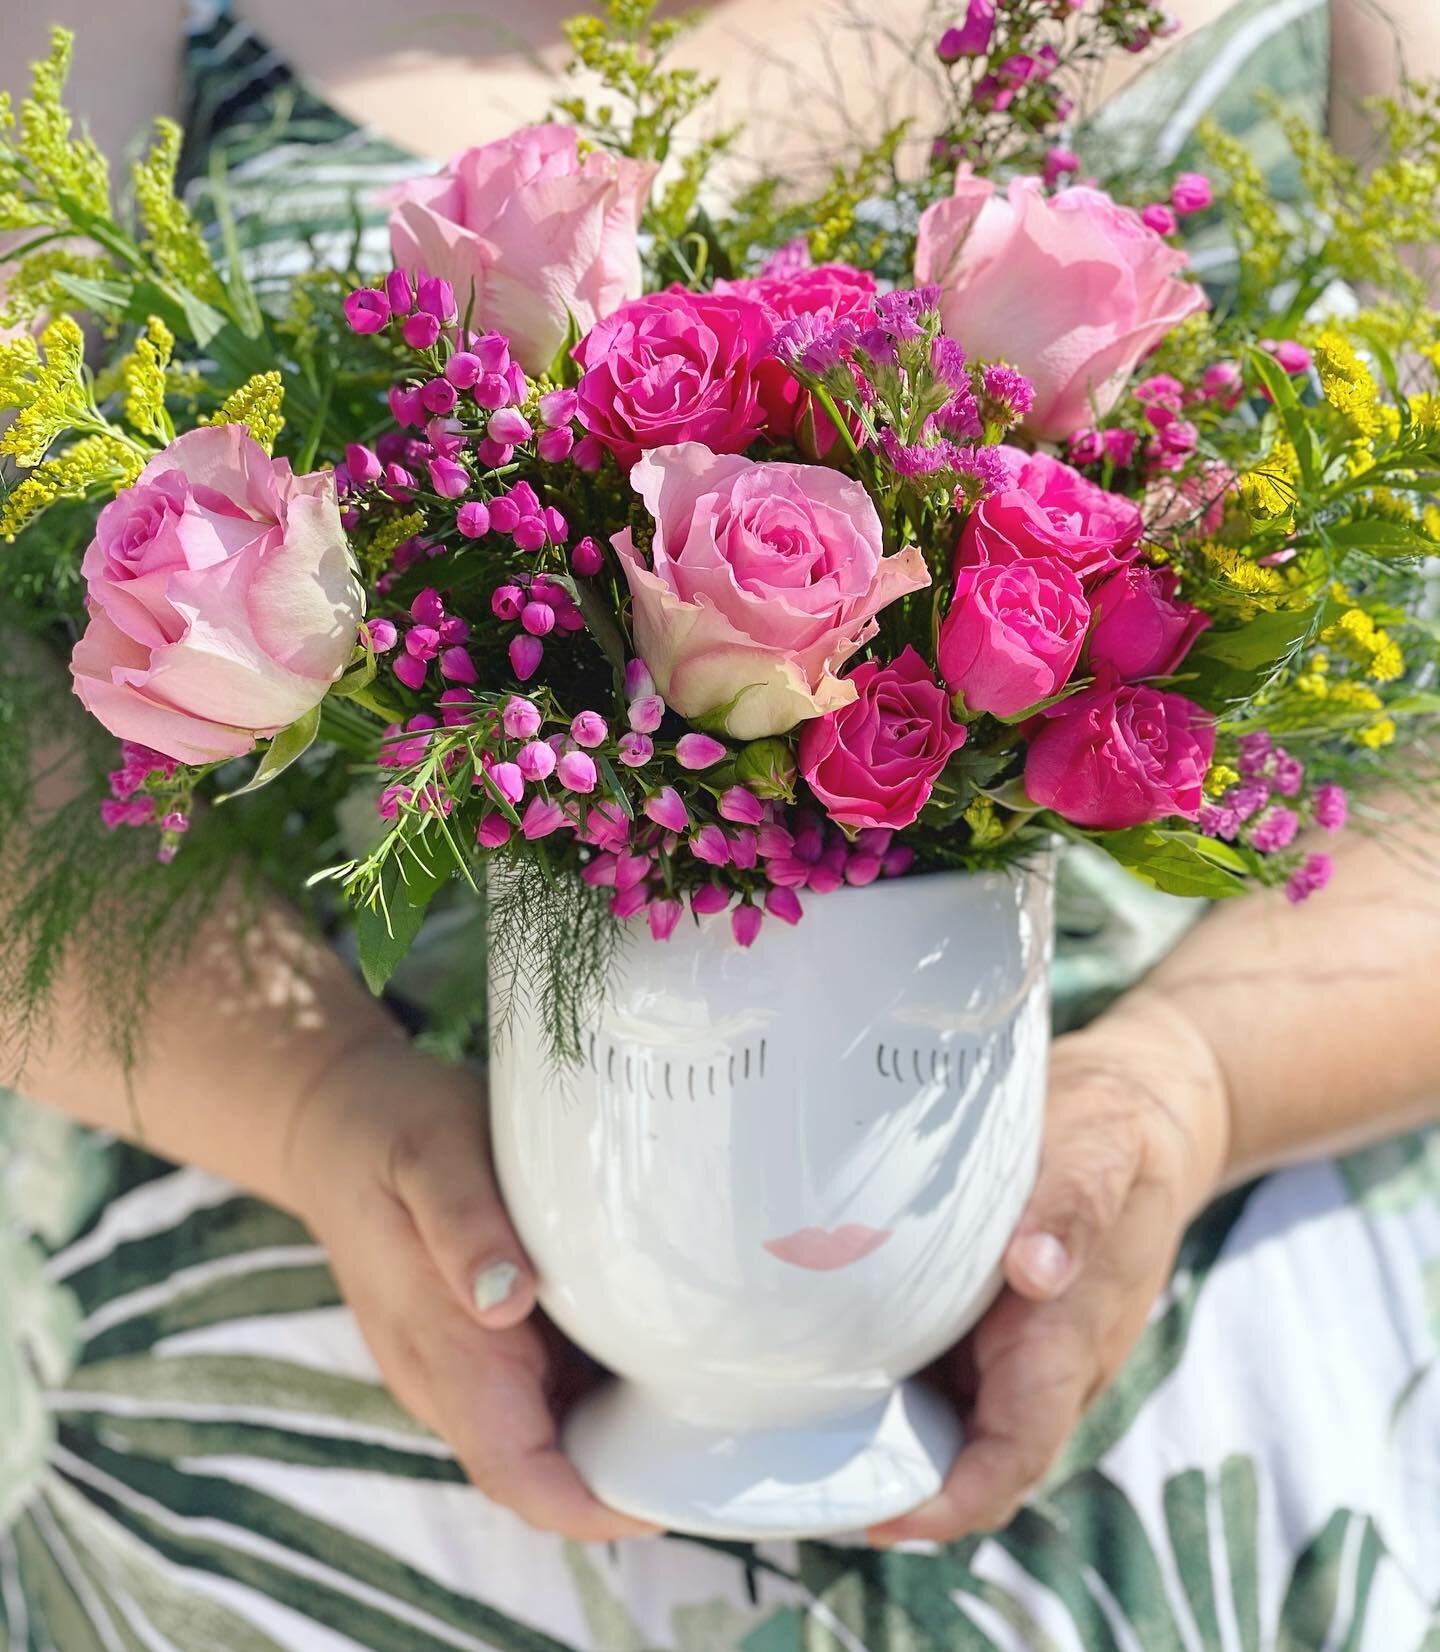 One day a year is never enough to celebrate the moms in our lives &mdash; whether it&rsquo;s the one who raised you or the one you chose to be part of your life. The least we can do is give them beautiful flowers! 💐 Stop by @trompeaubakery this Satu